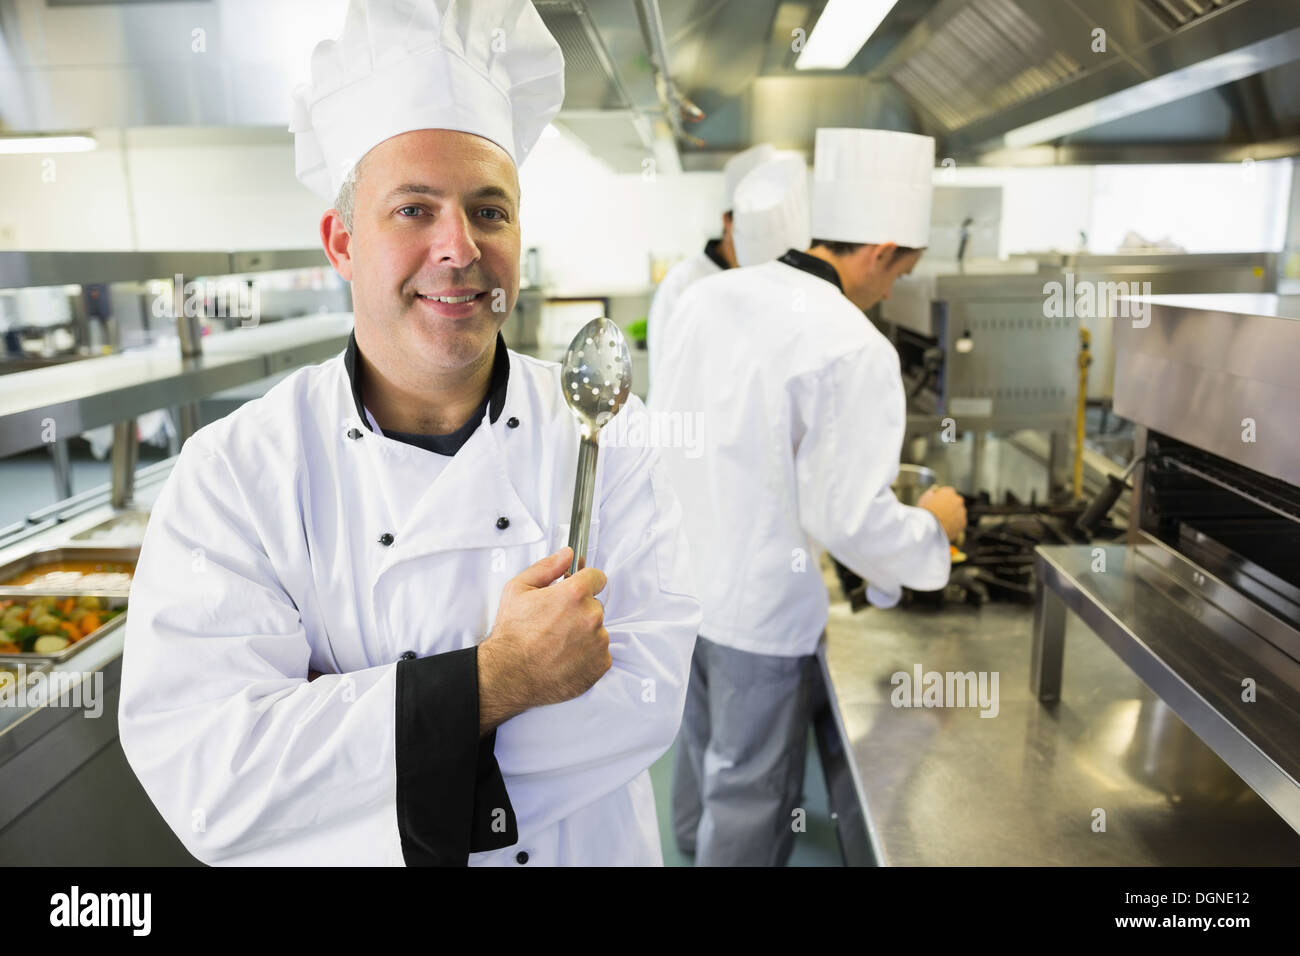 Experienced male chef posing in a kitchen Stock Photo